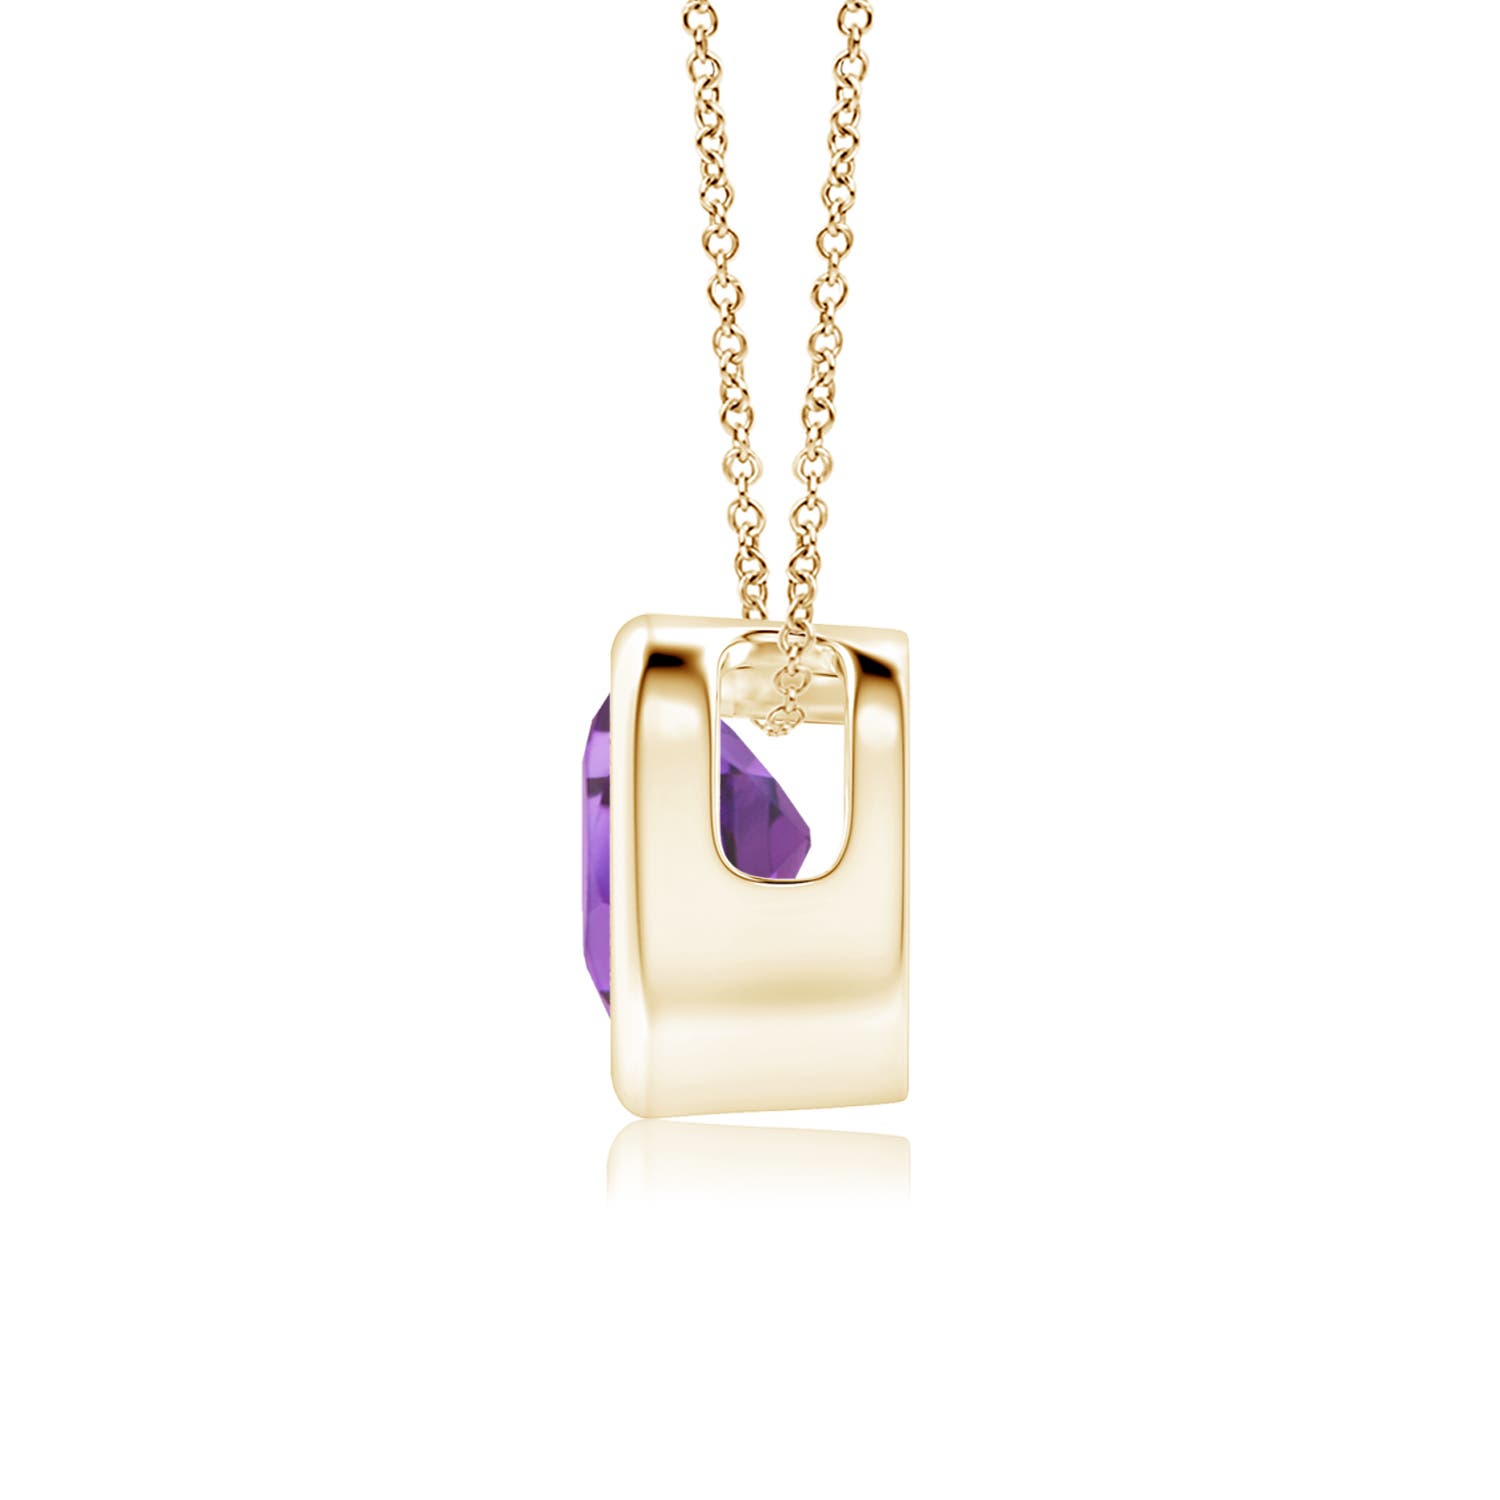 A - Amethyst / 0.35 CT / 14 KT Yellow Gold